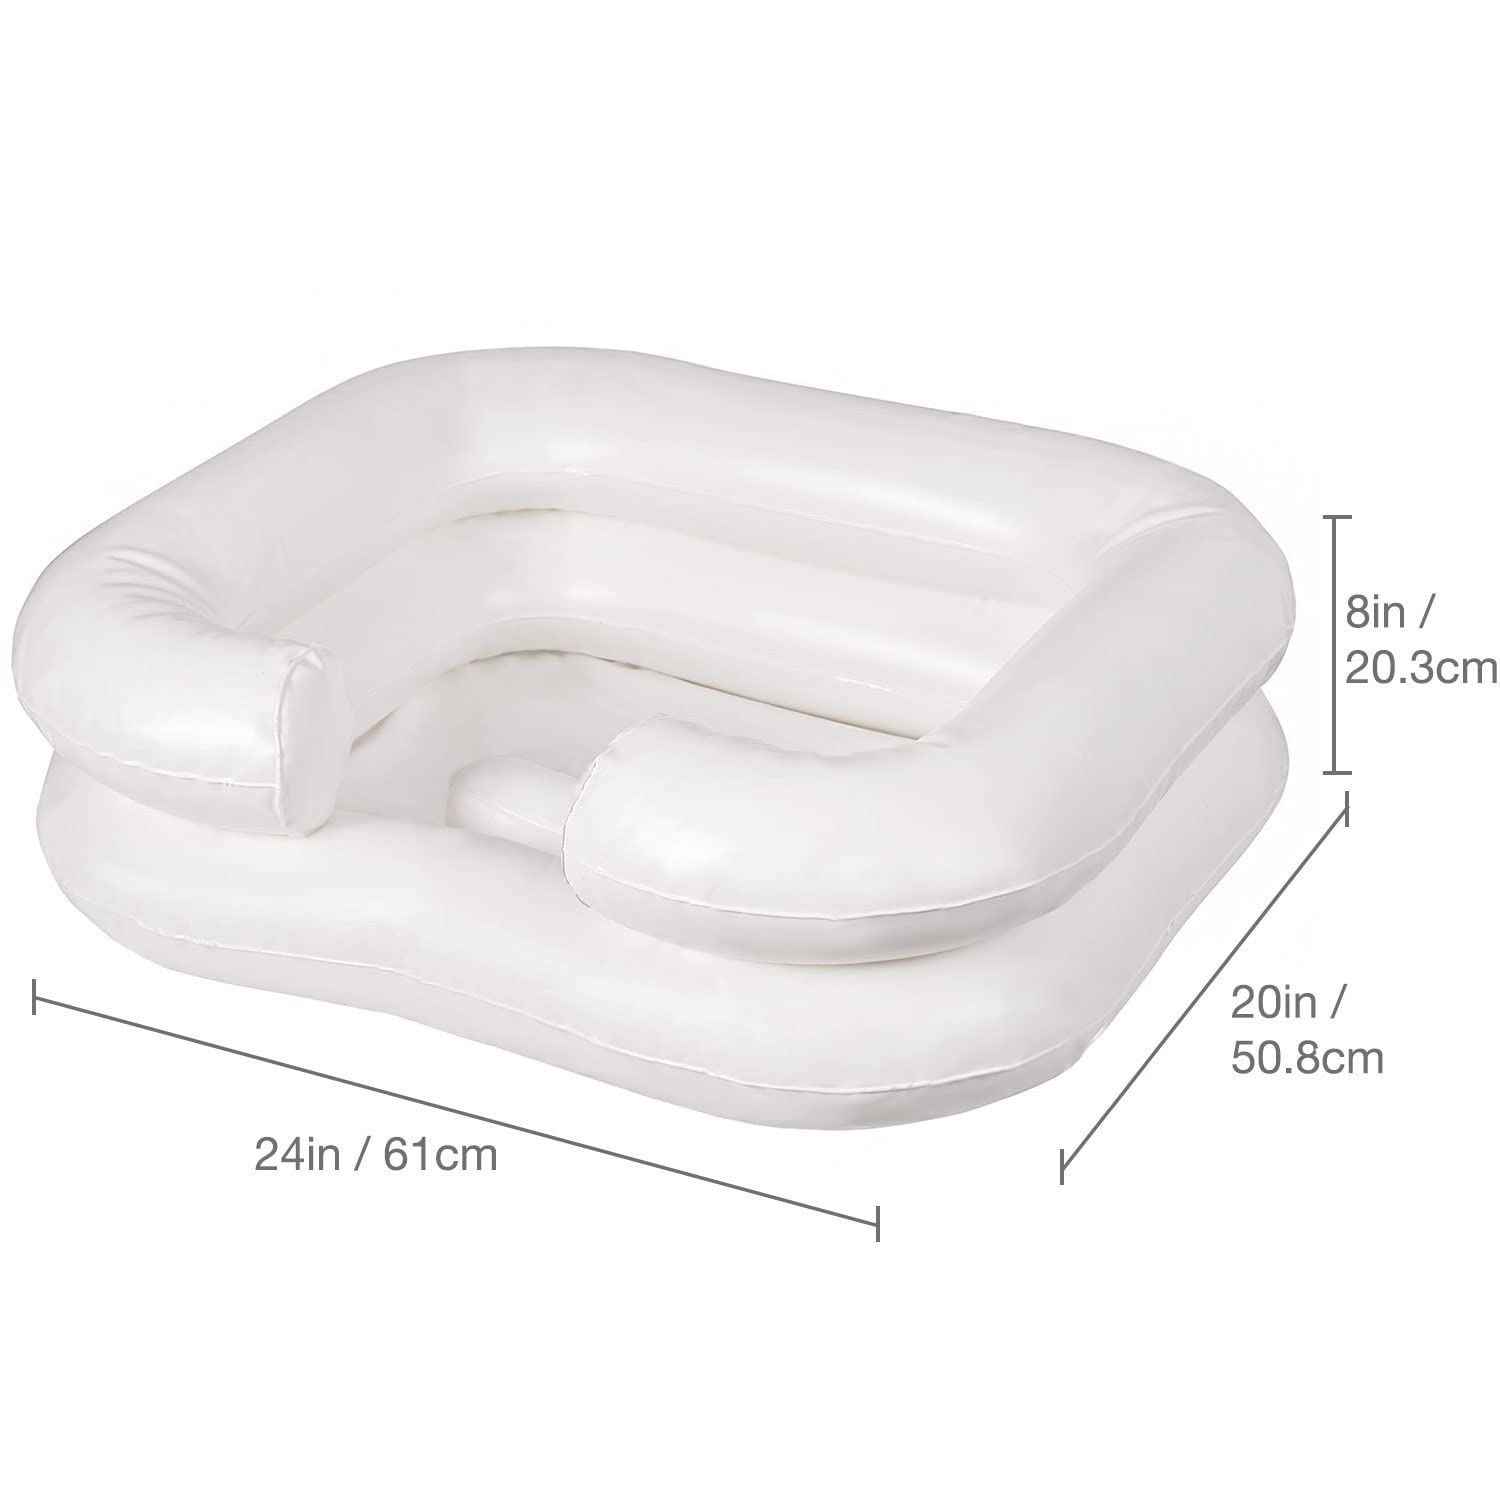 DMI Portable Inflatable Shampoo Bowl for Bedside and in Bed Hair Washing, Hair Cuts and Hair Coloring for The Elderly, Disabled, Bedridden and Handicapped, White (Pack of 24)